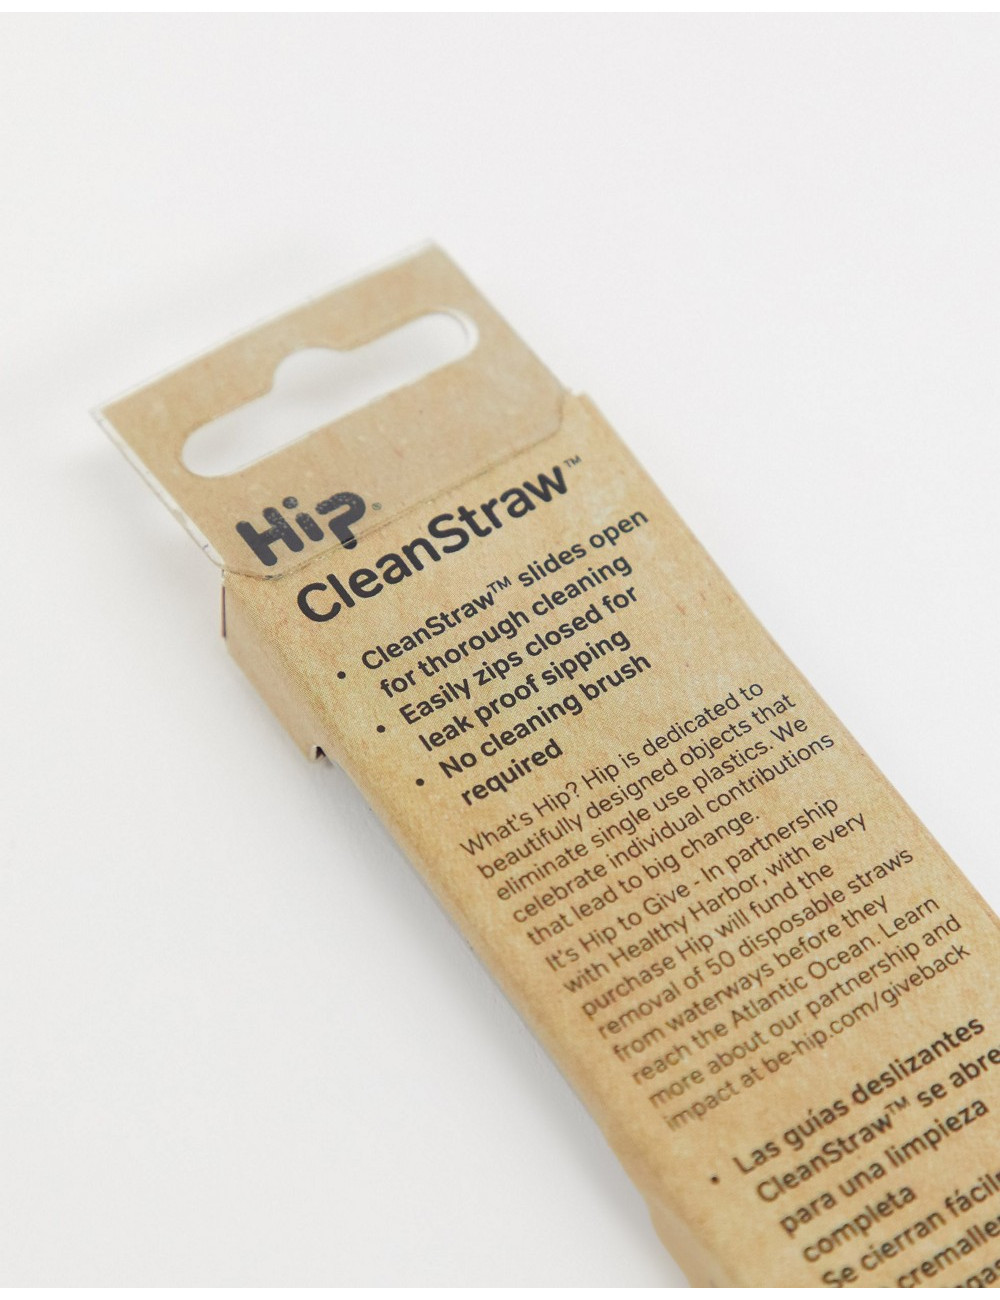 Hip cleanstraw 3 pack...